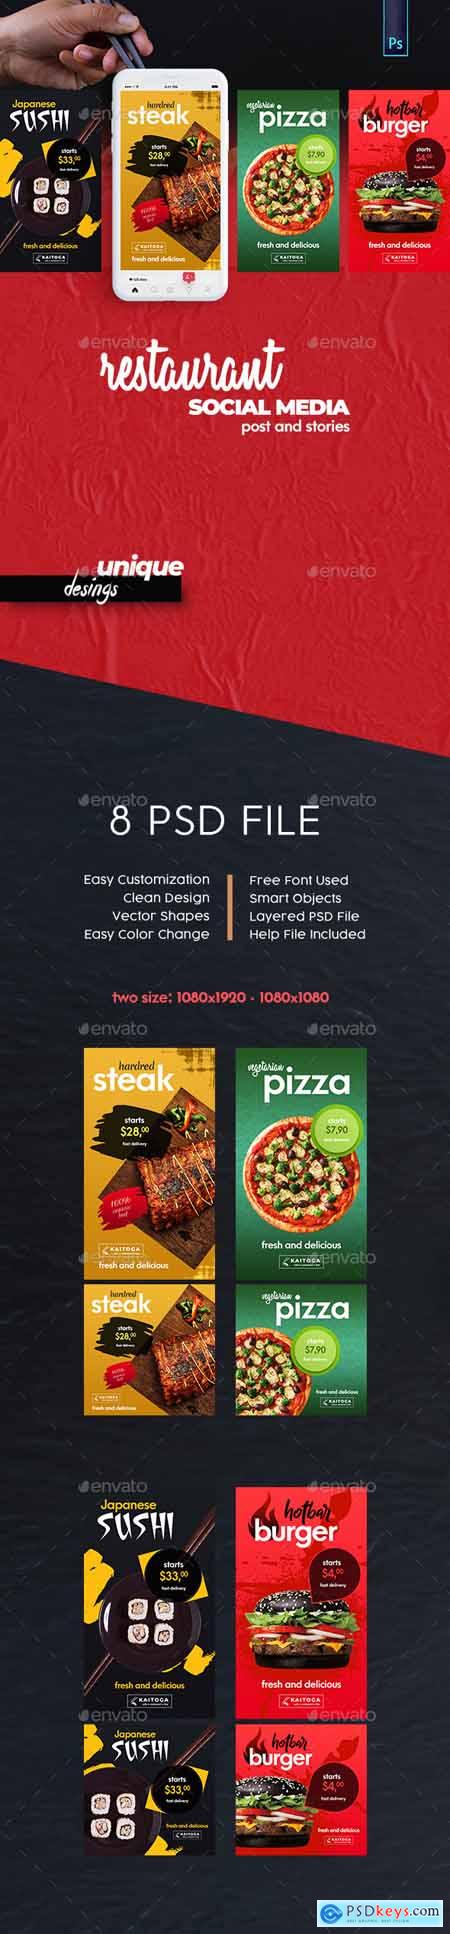 Graphicriver Restaurant - Food Social Media Post and Stories